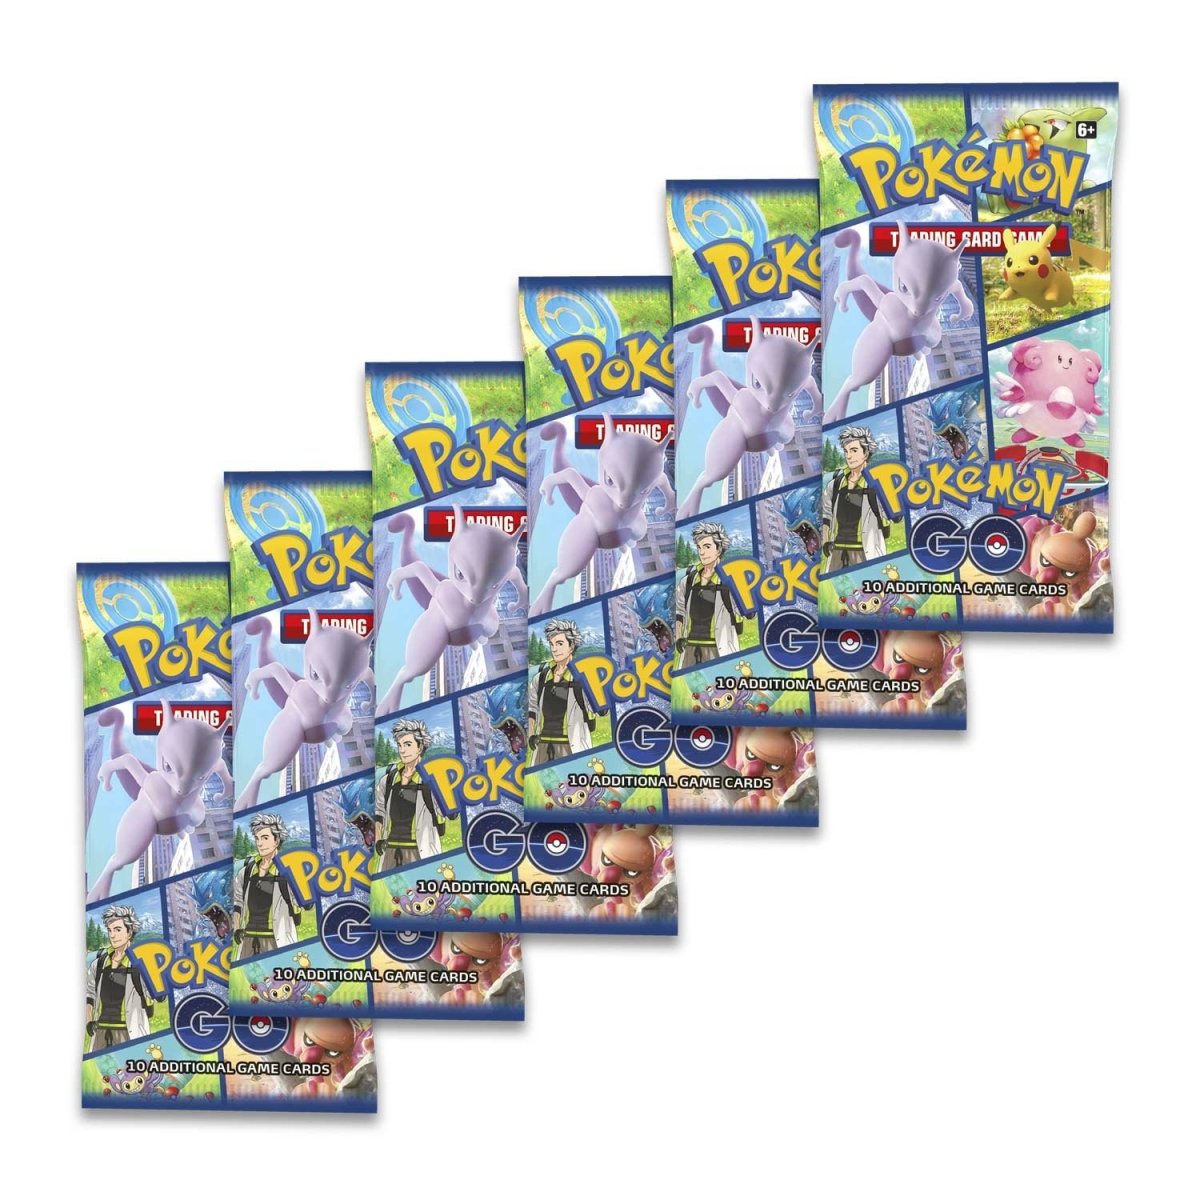 POKEMON GO BOOSTER SINGLE PACK  - CHRISTMAS BLOWOUT SALE!!!